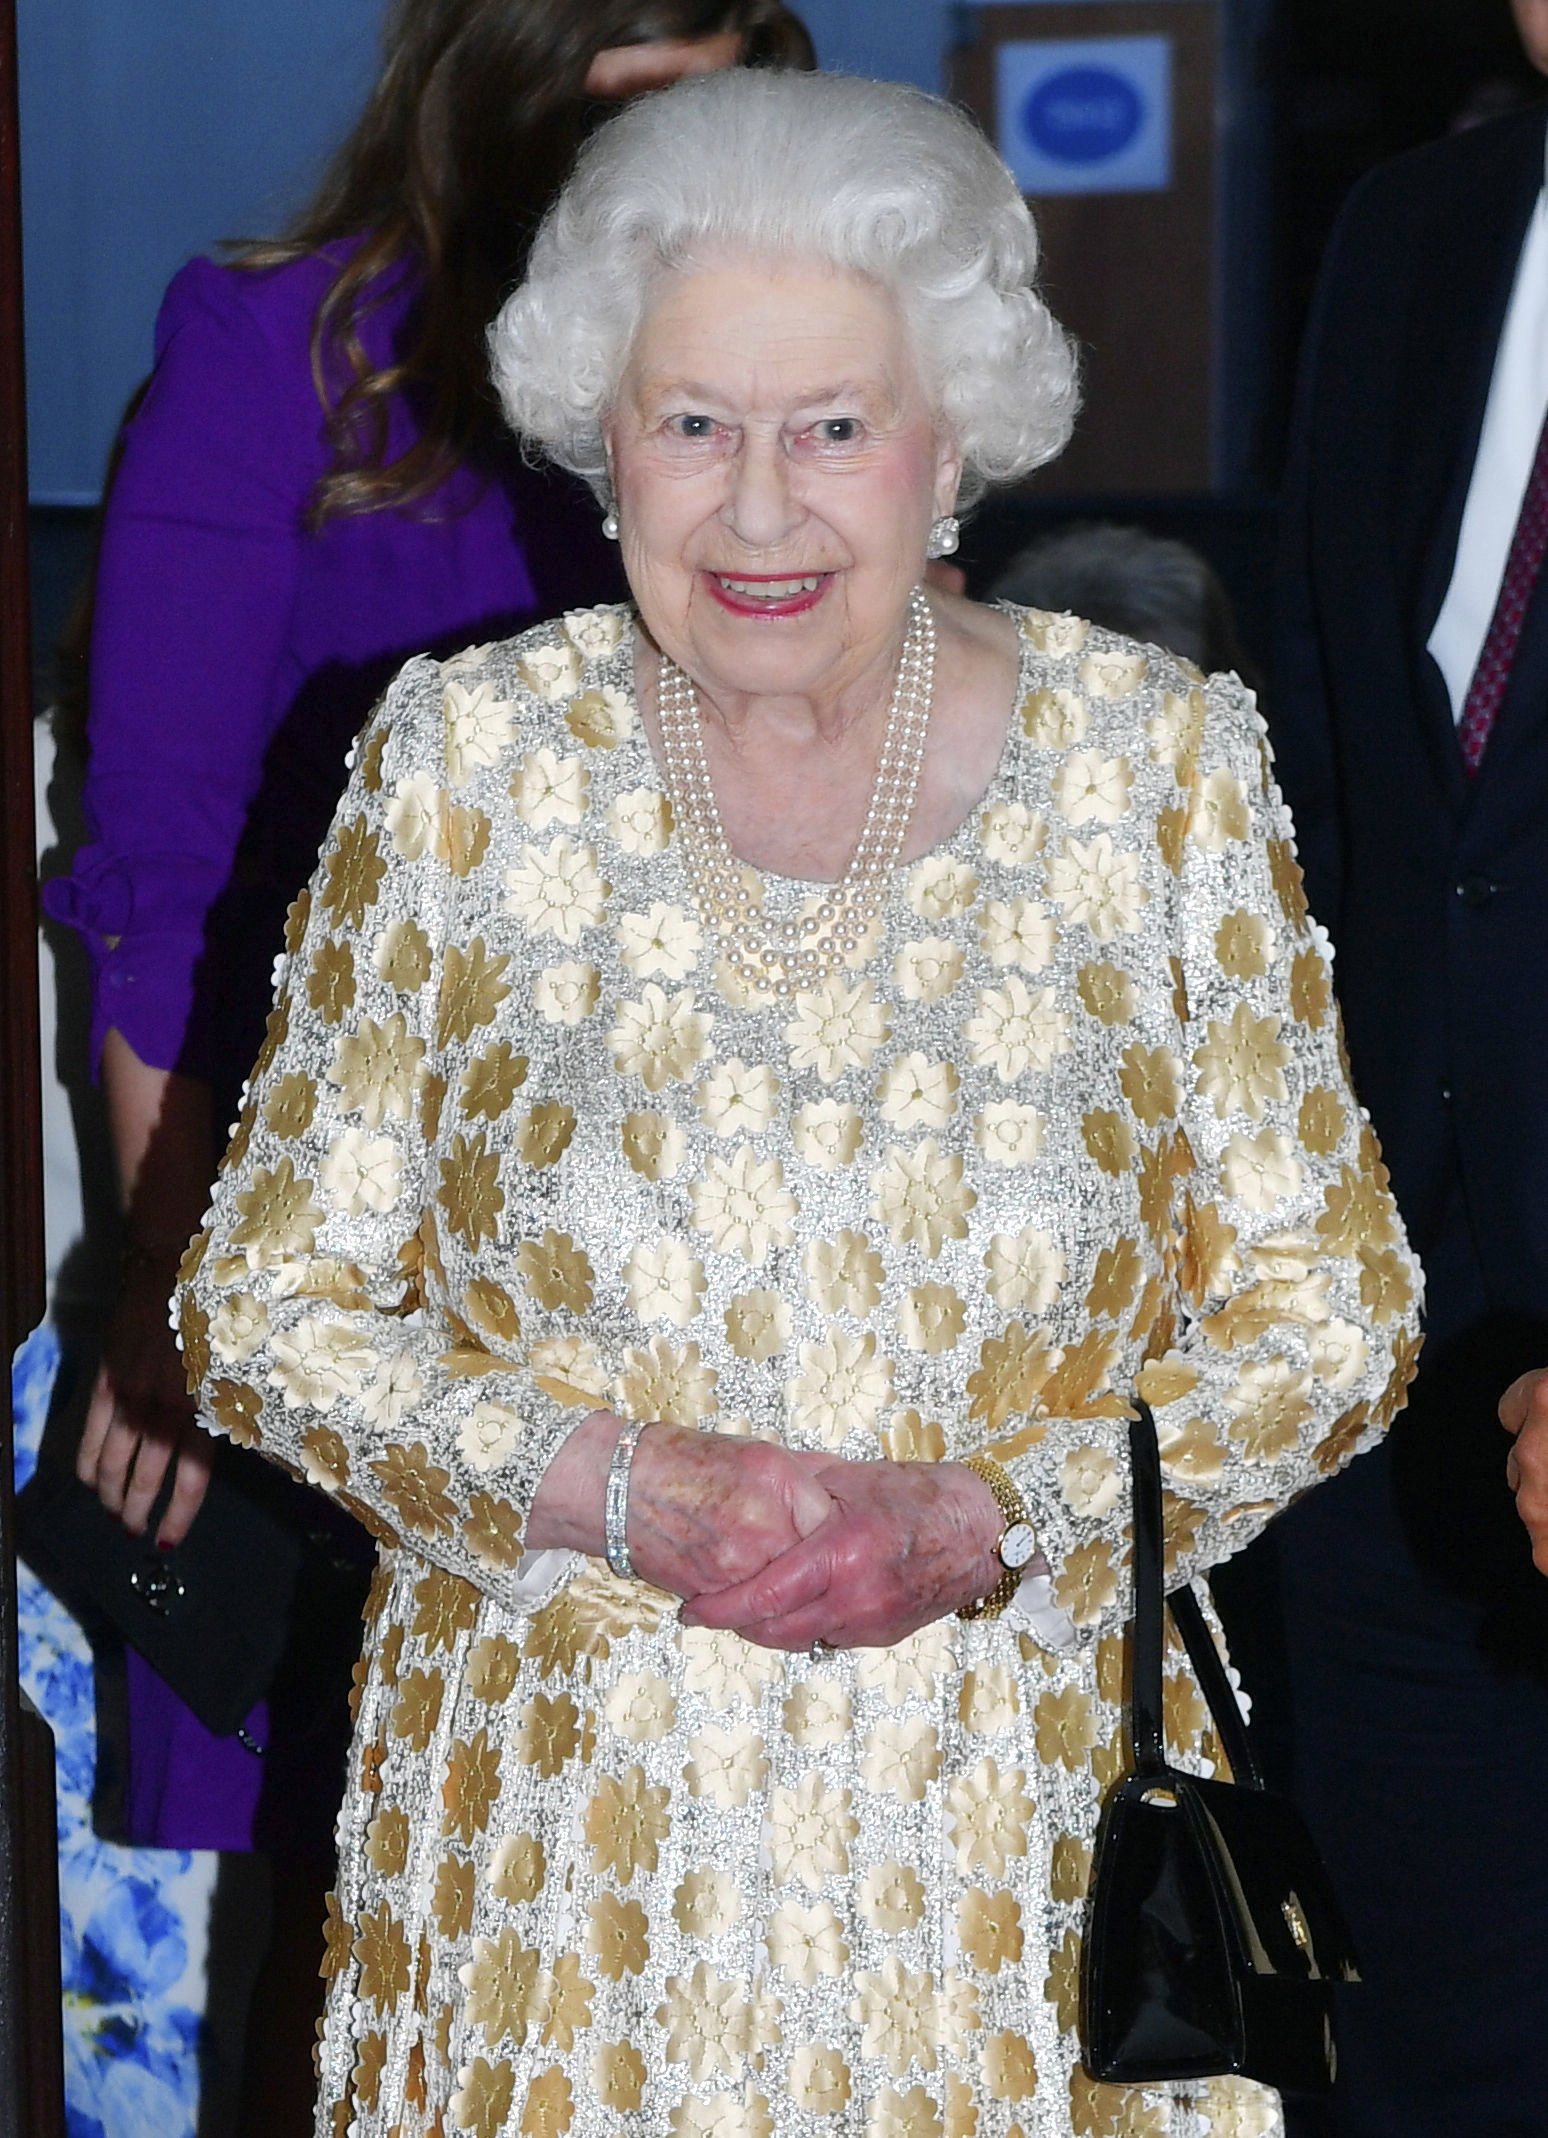 PHOTO: Britain's Queen Elizabeth II arrives at the Royal Albert Hall in London to attend a concert to celebrate her 92nd birthday, April 21, 2018.